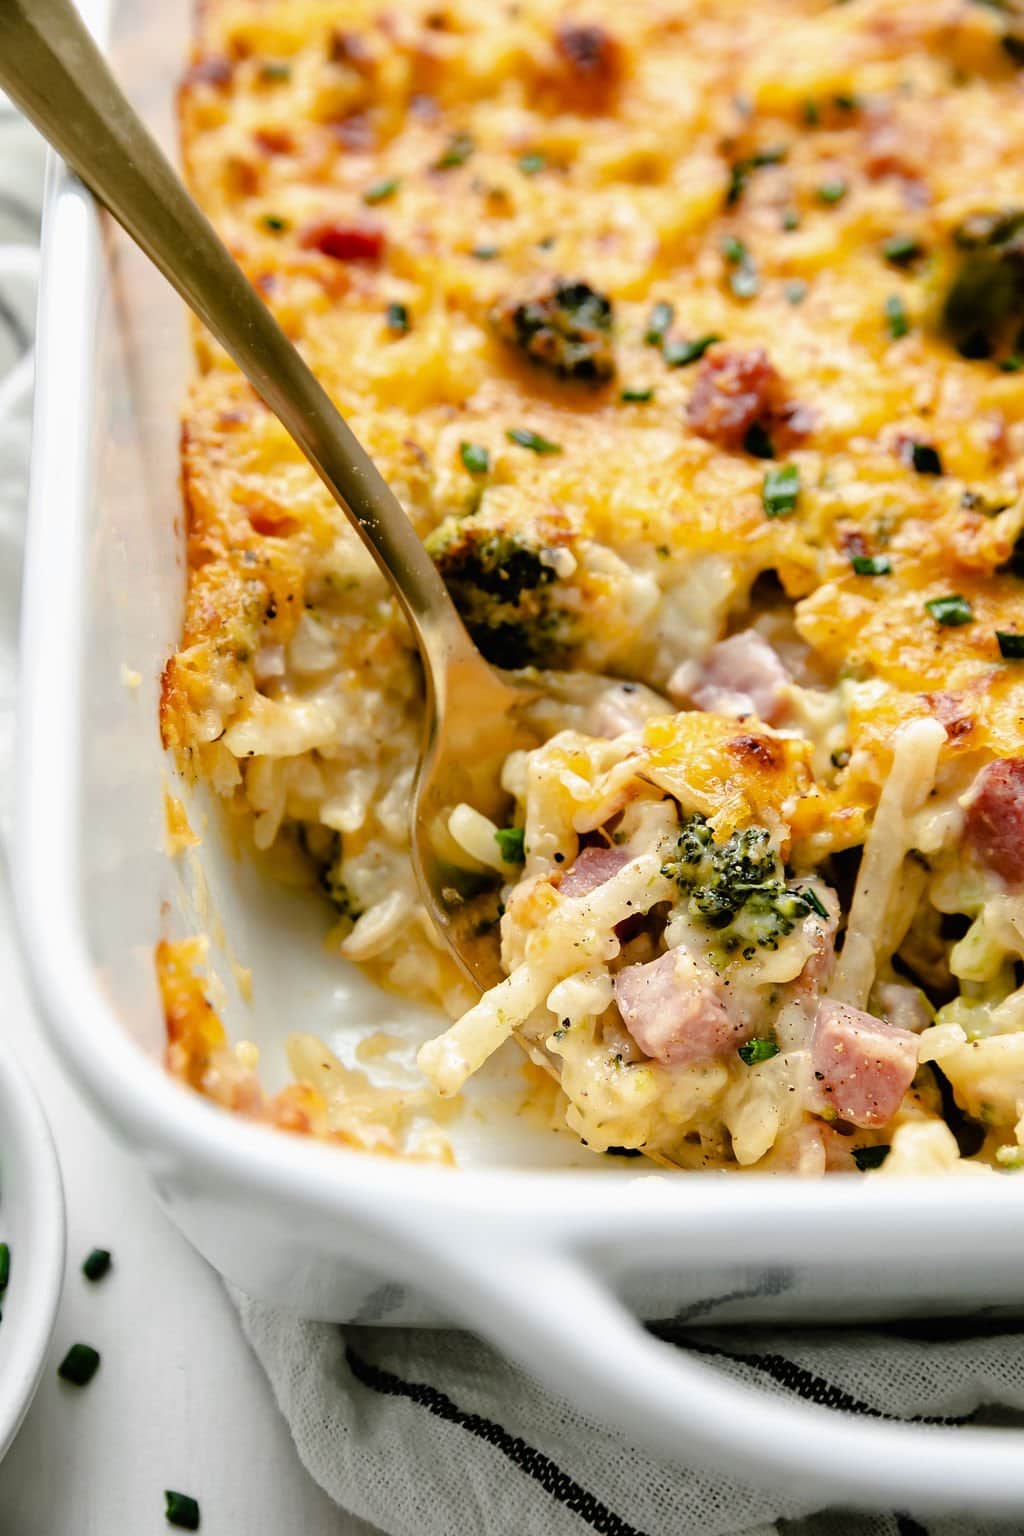 https://therealfooddietitians.com/wp-content/uploads/2022/03/Scalloped-Potatoes-with-Ham-6.jpg